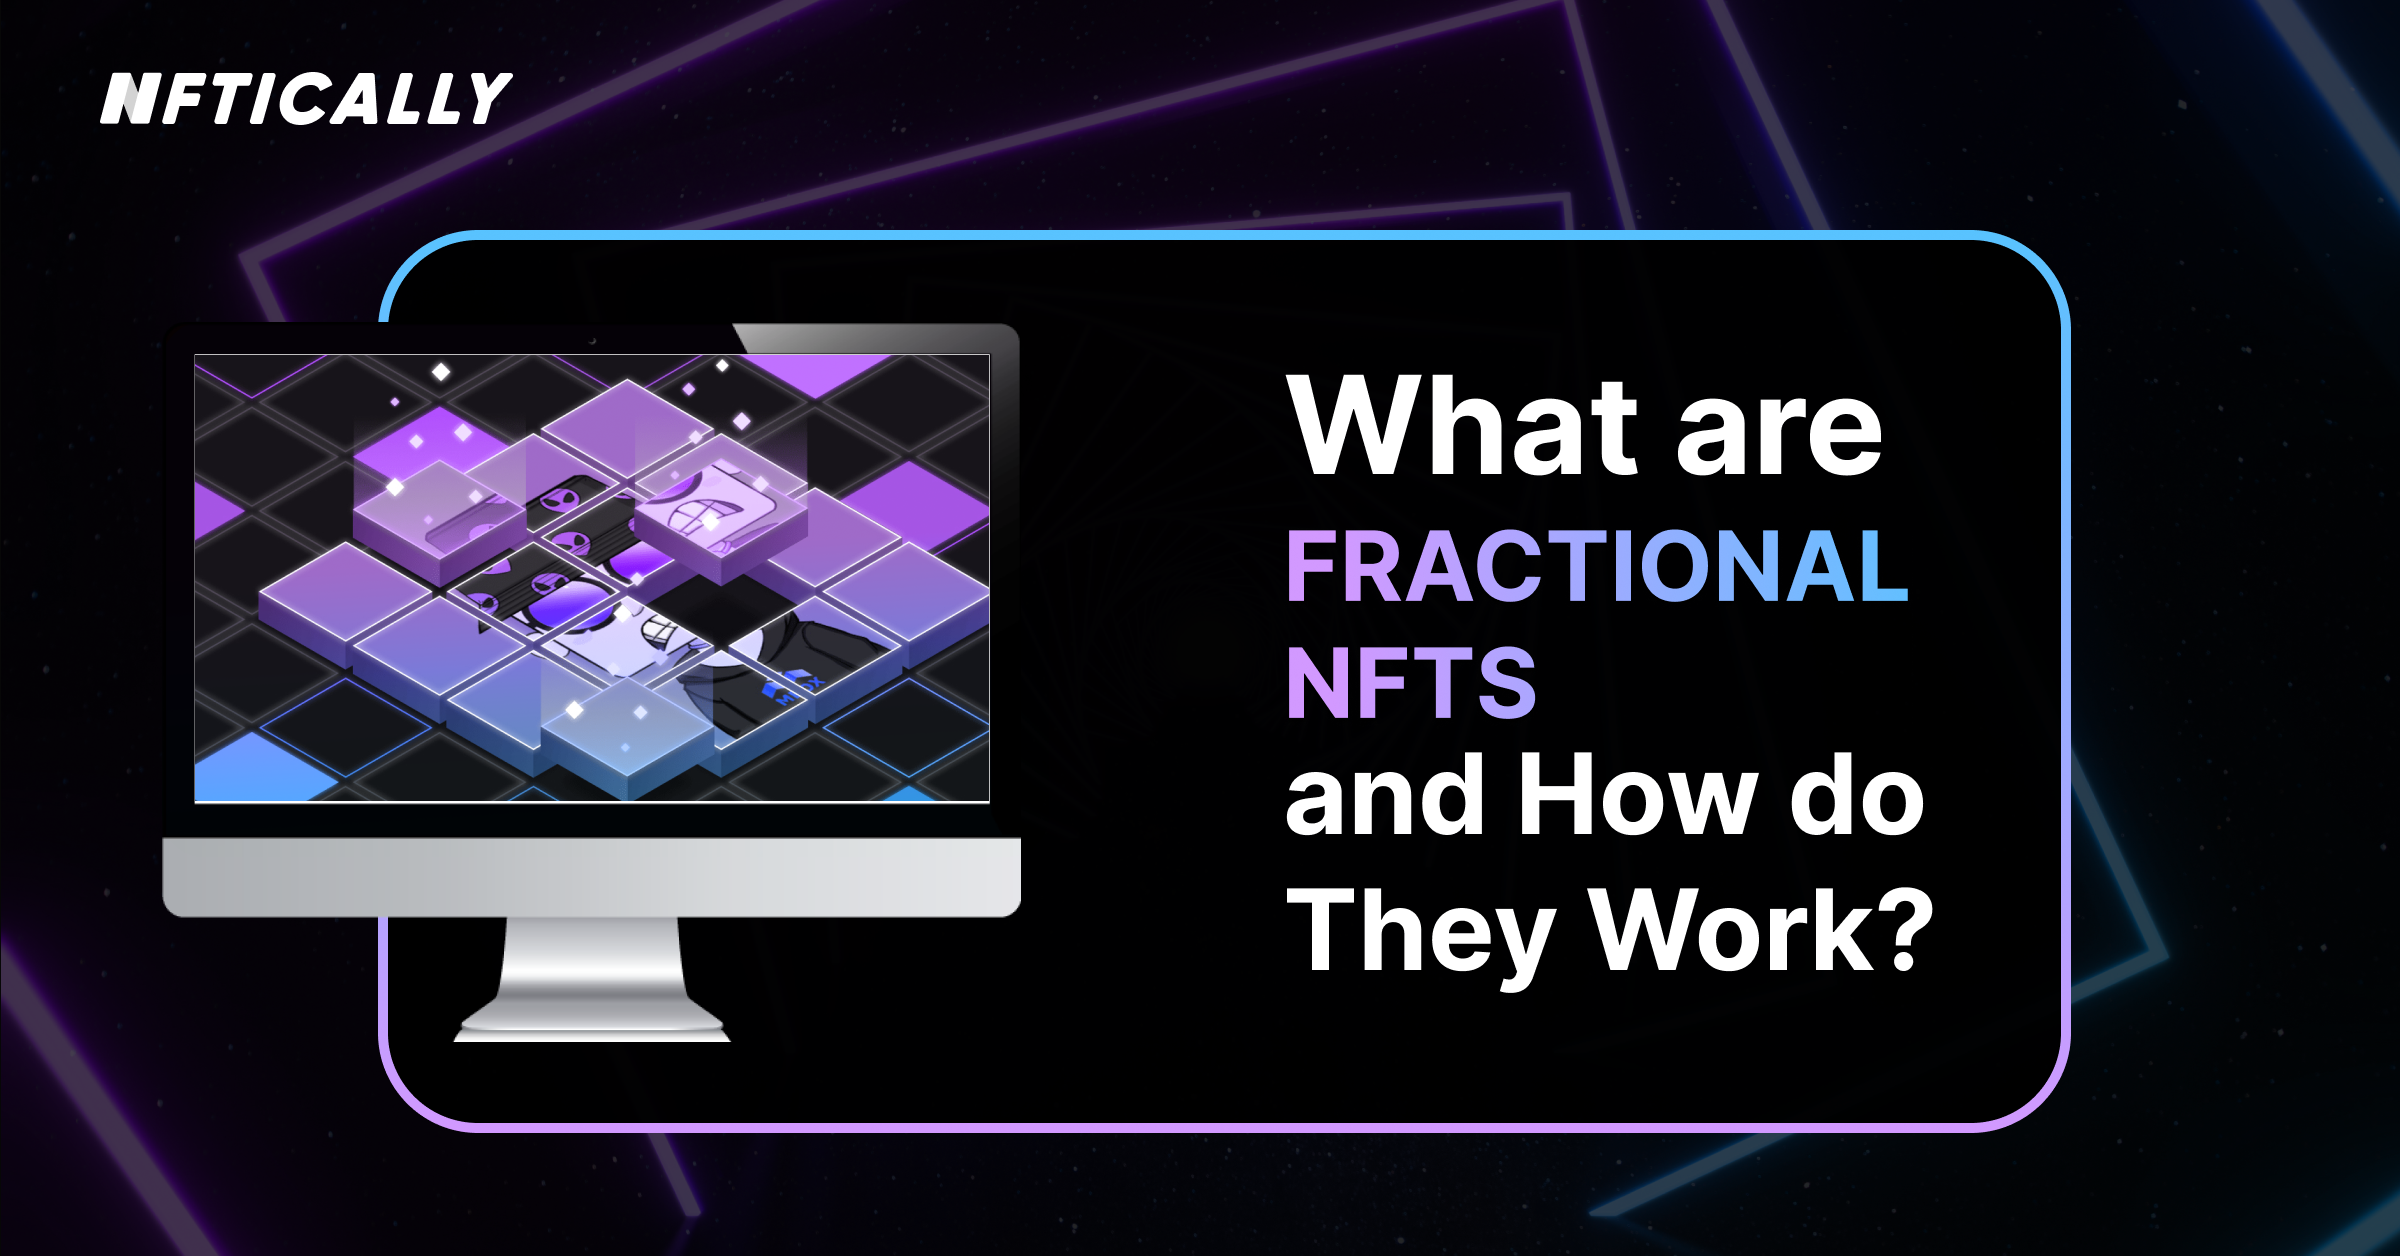 What are Fractional NFTs and How do They Work